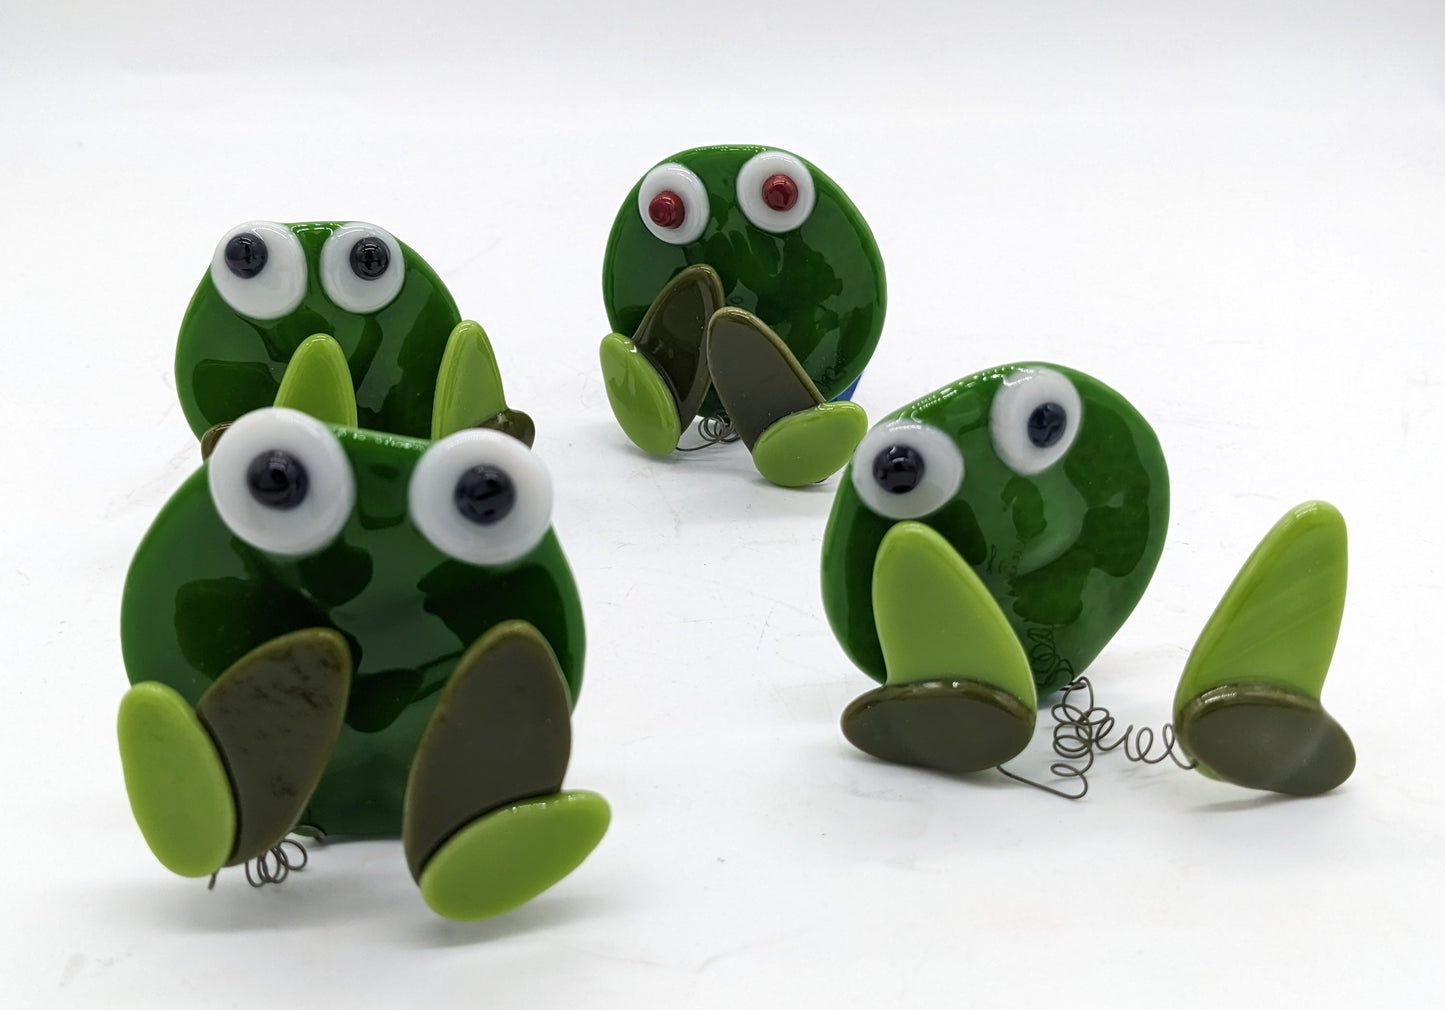 4 place card holders that look like frogs